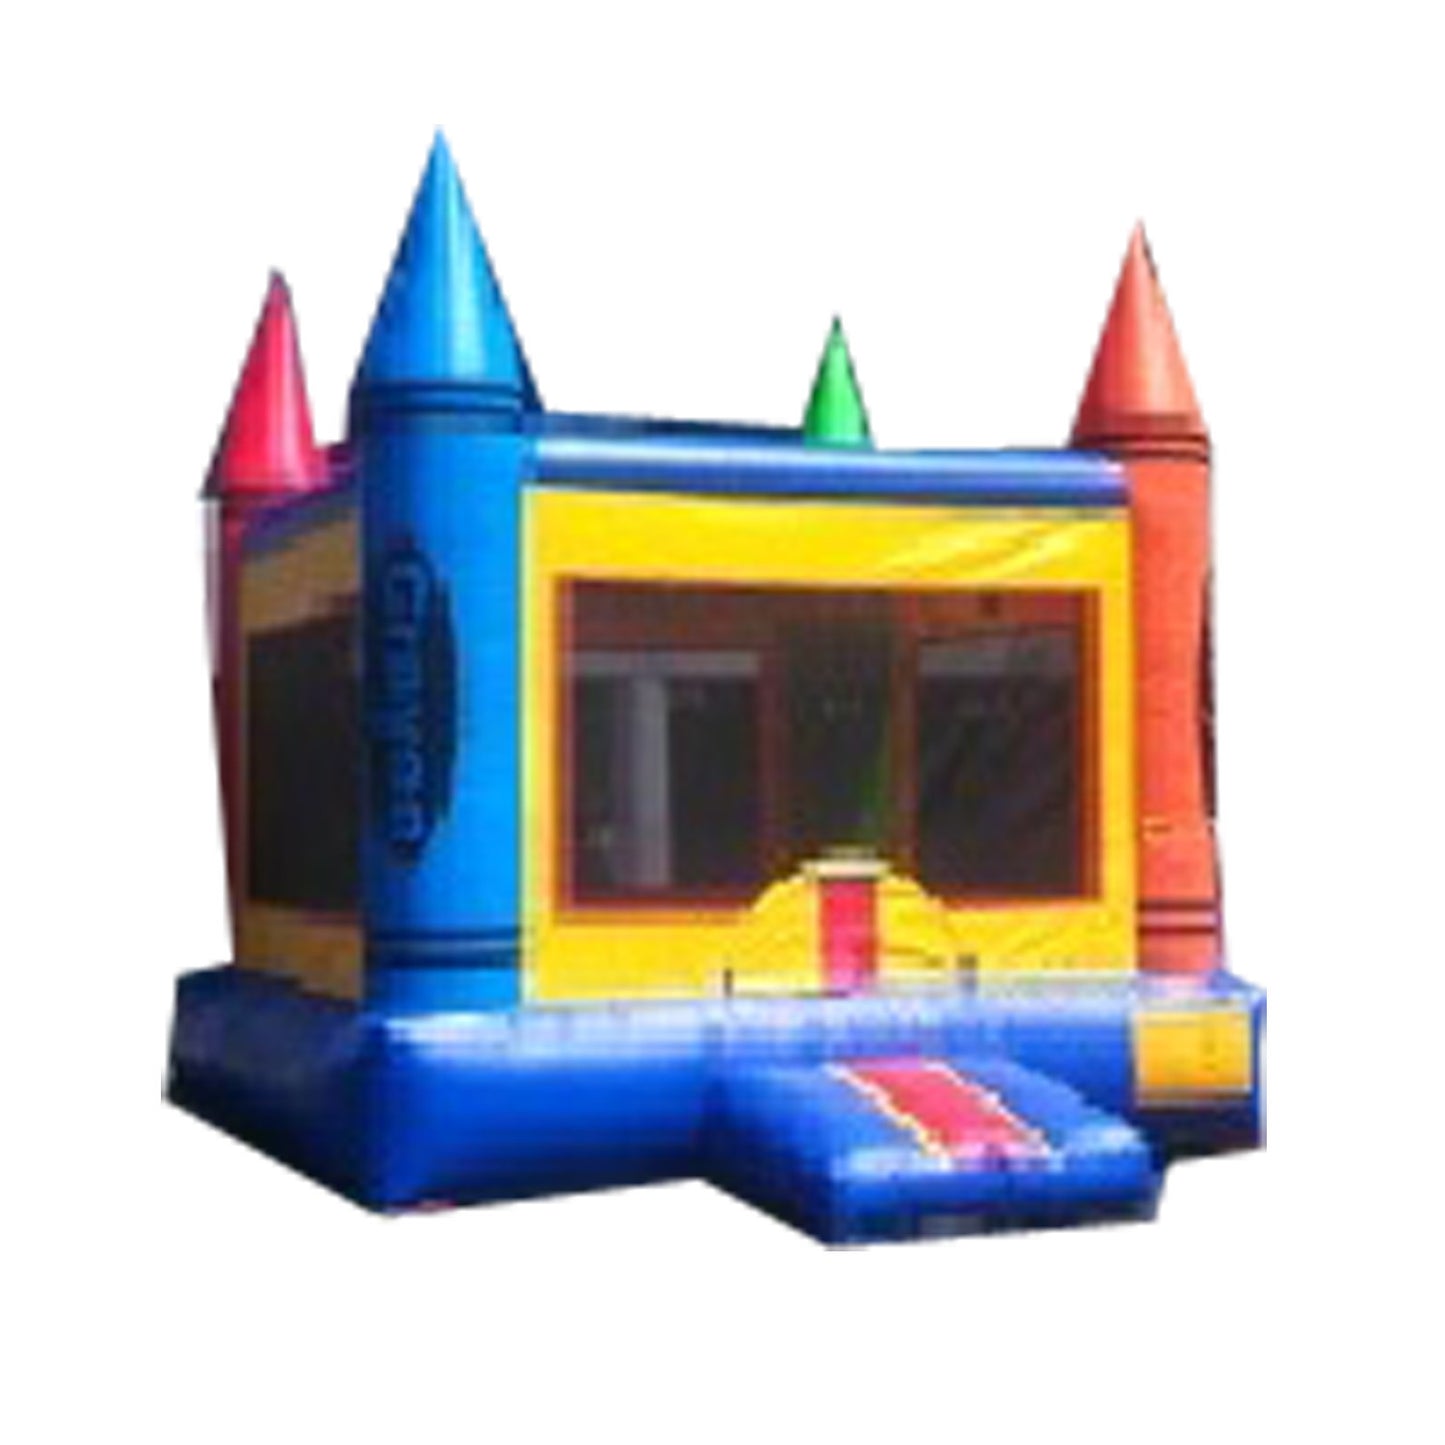 CRAYON   TIP  STYLE -  BOUNCE  HOUSE